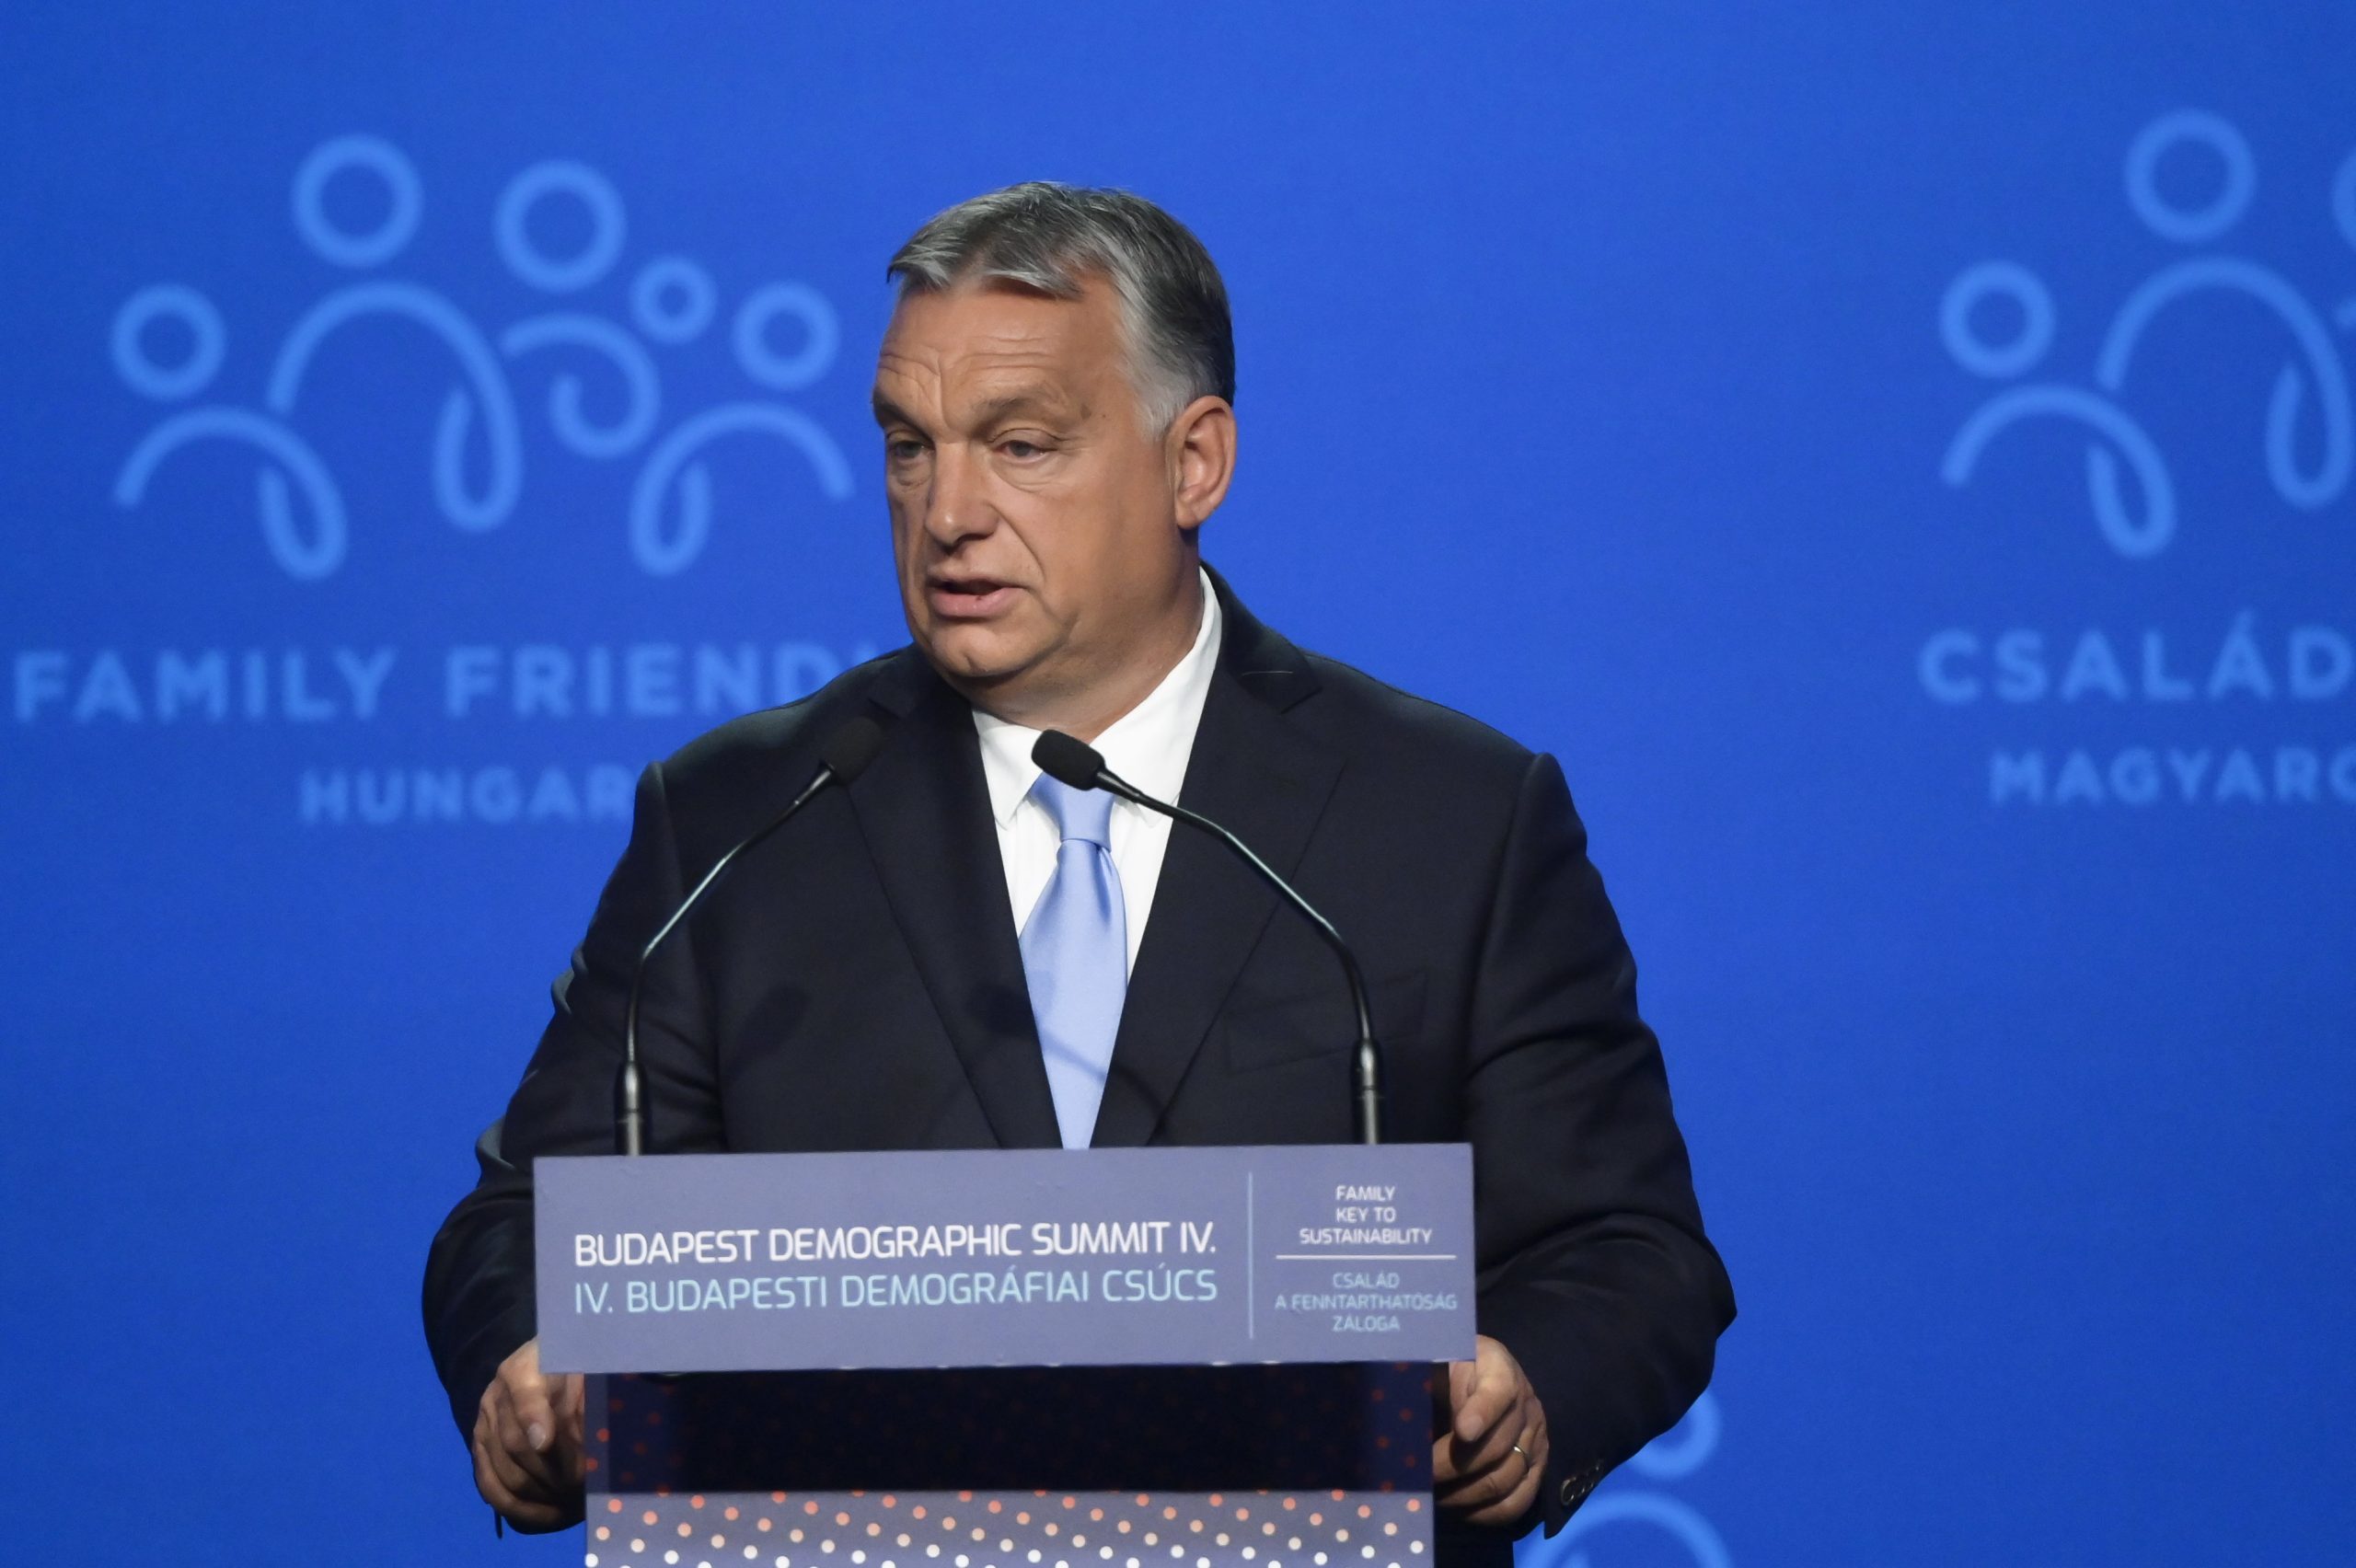 Hefty Pension and Tax Handouts Promised by Orbán Gov't Arrive in February, Weeks Ahead of Election